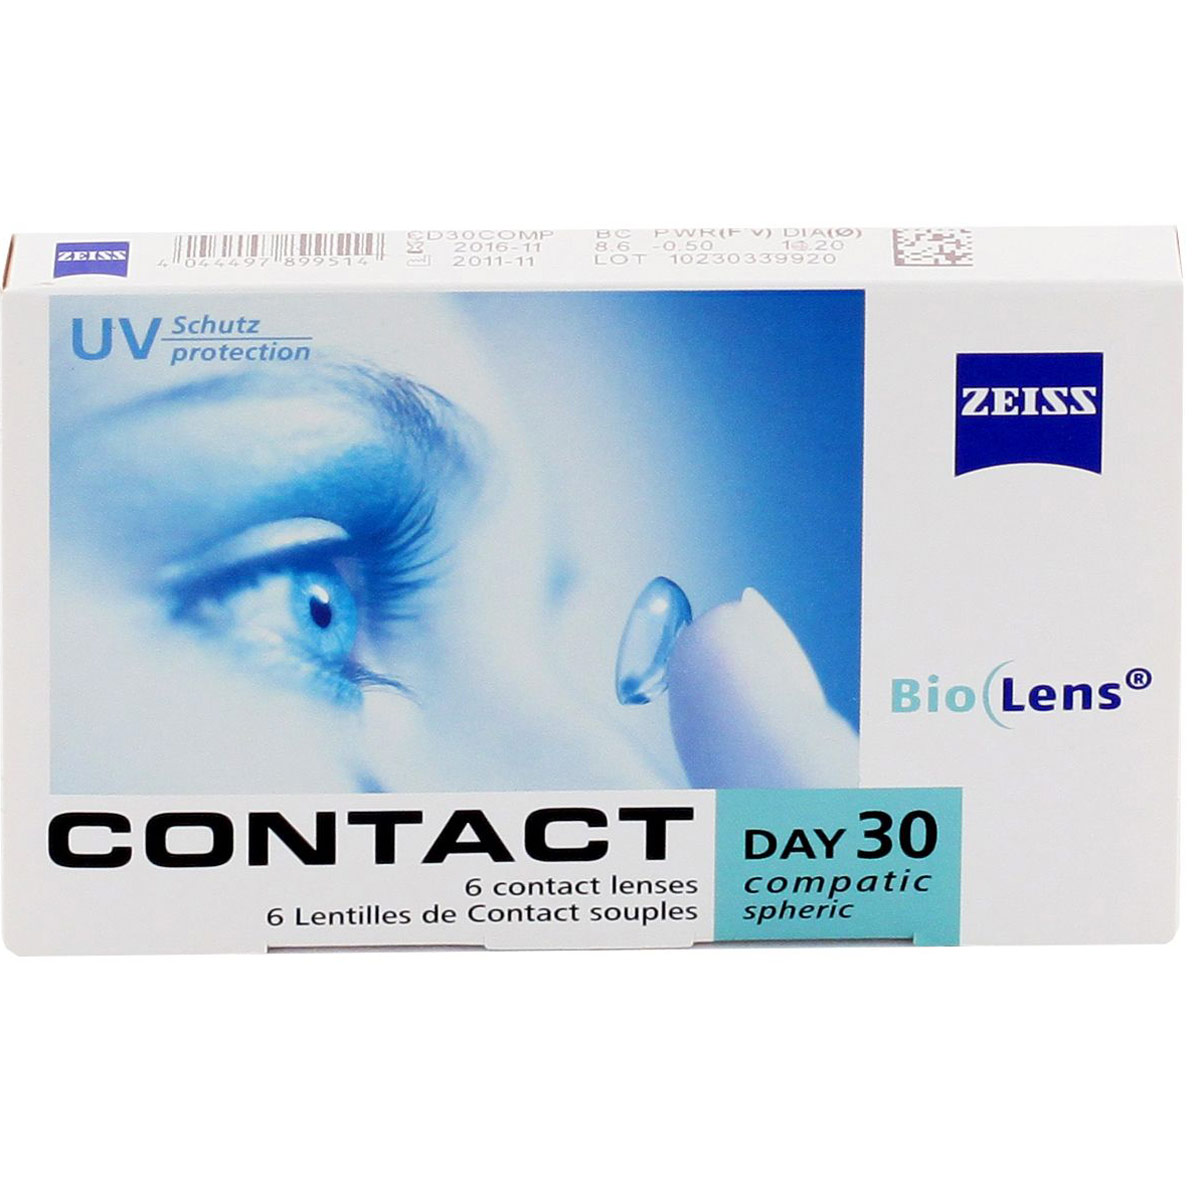 Day we contact. Контактные линзы Zeiss 1 Day. Zeiss линзы контактные Bio. Немецкие линзы Zeiss. Contact Day 30 Compatic..